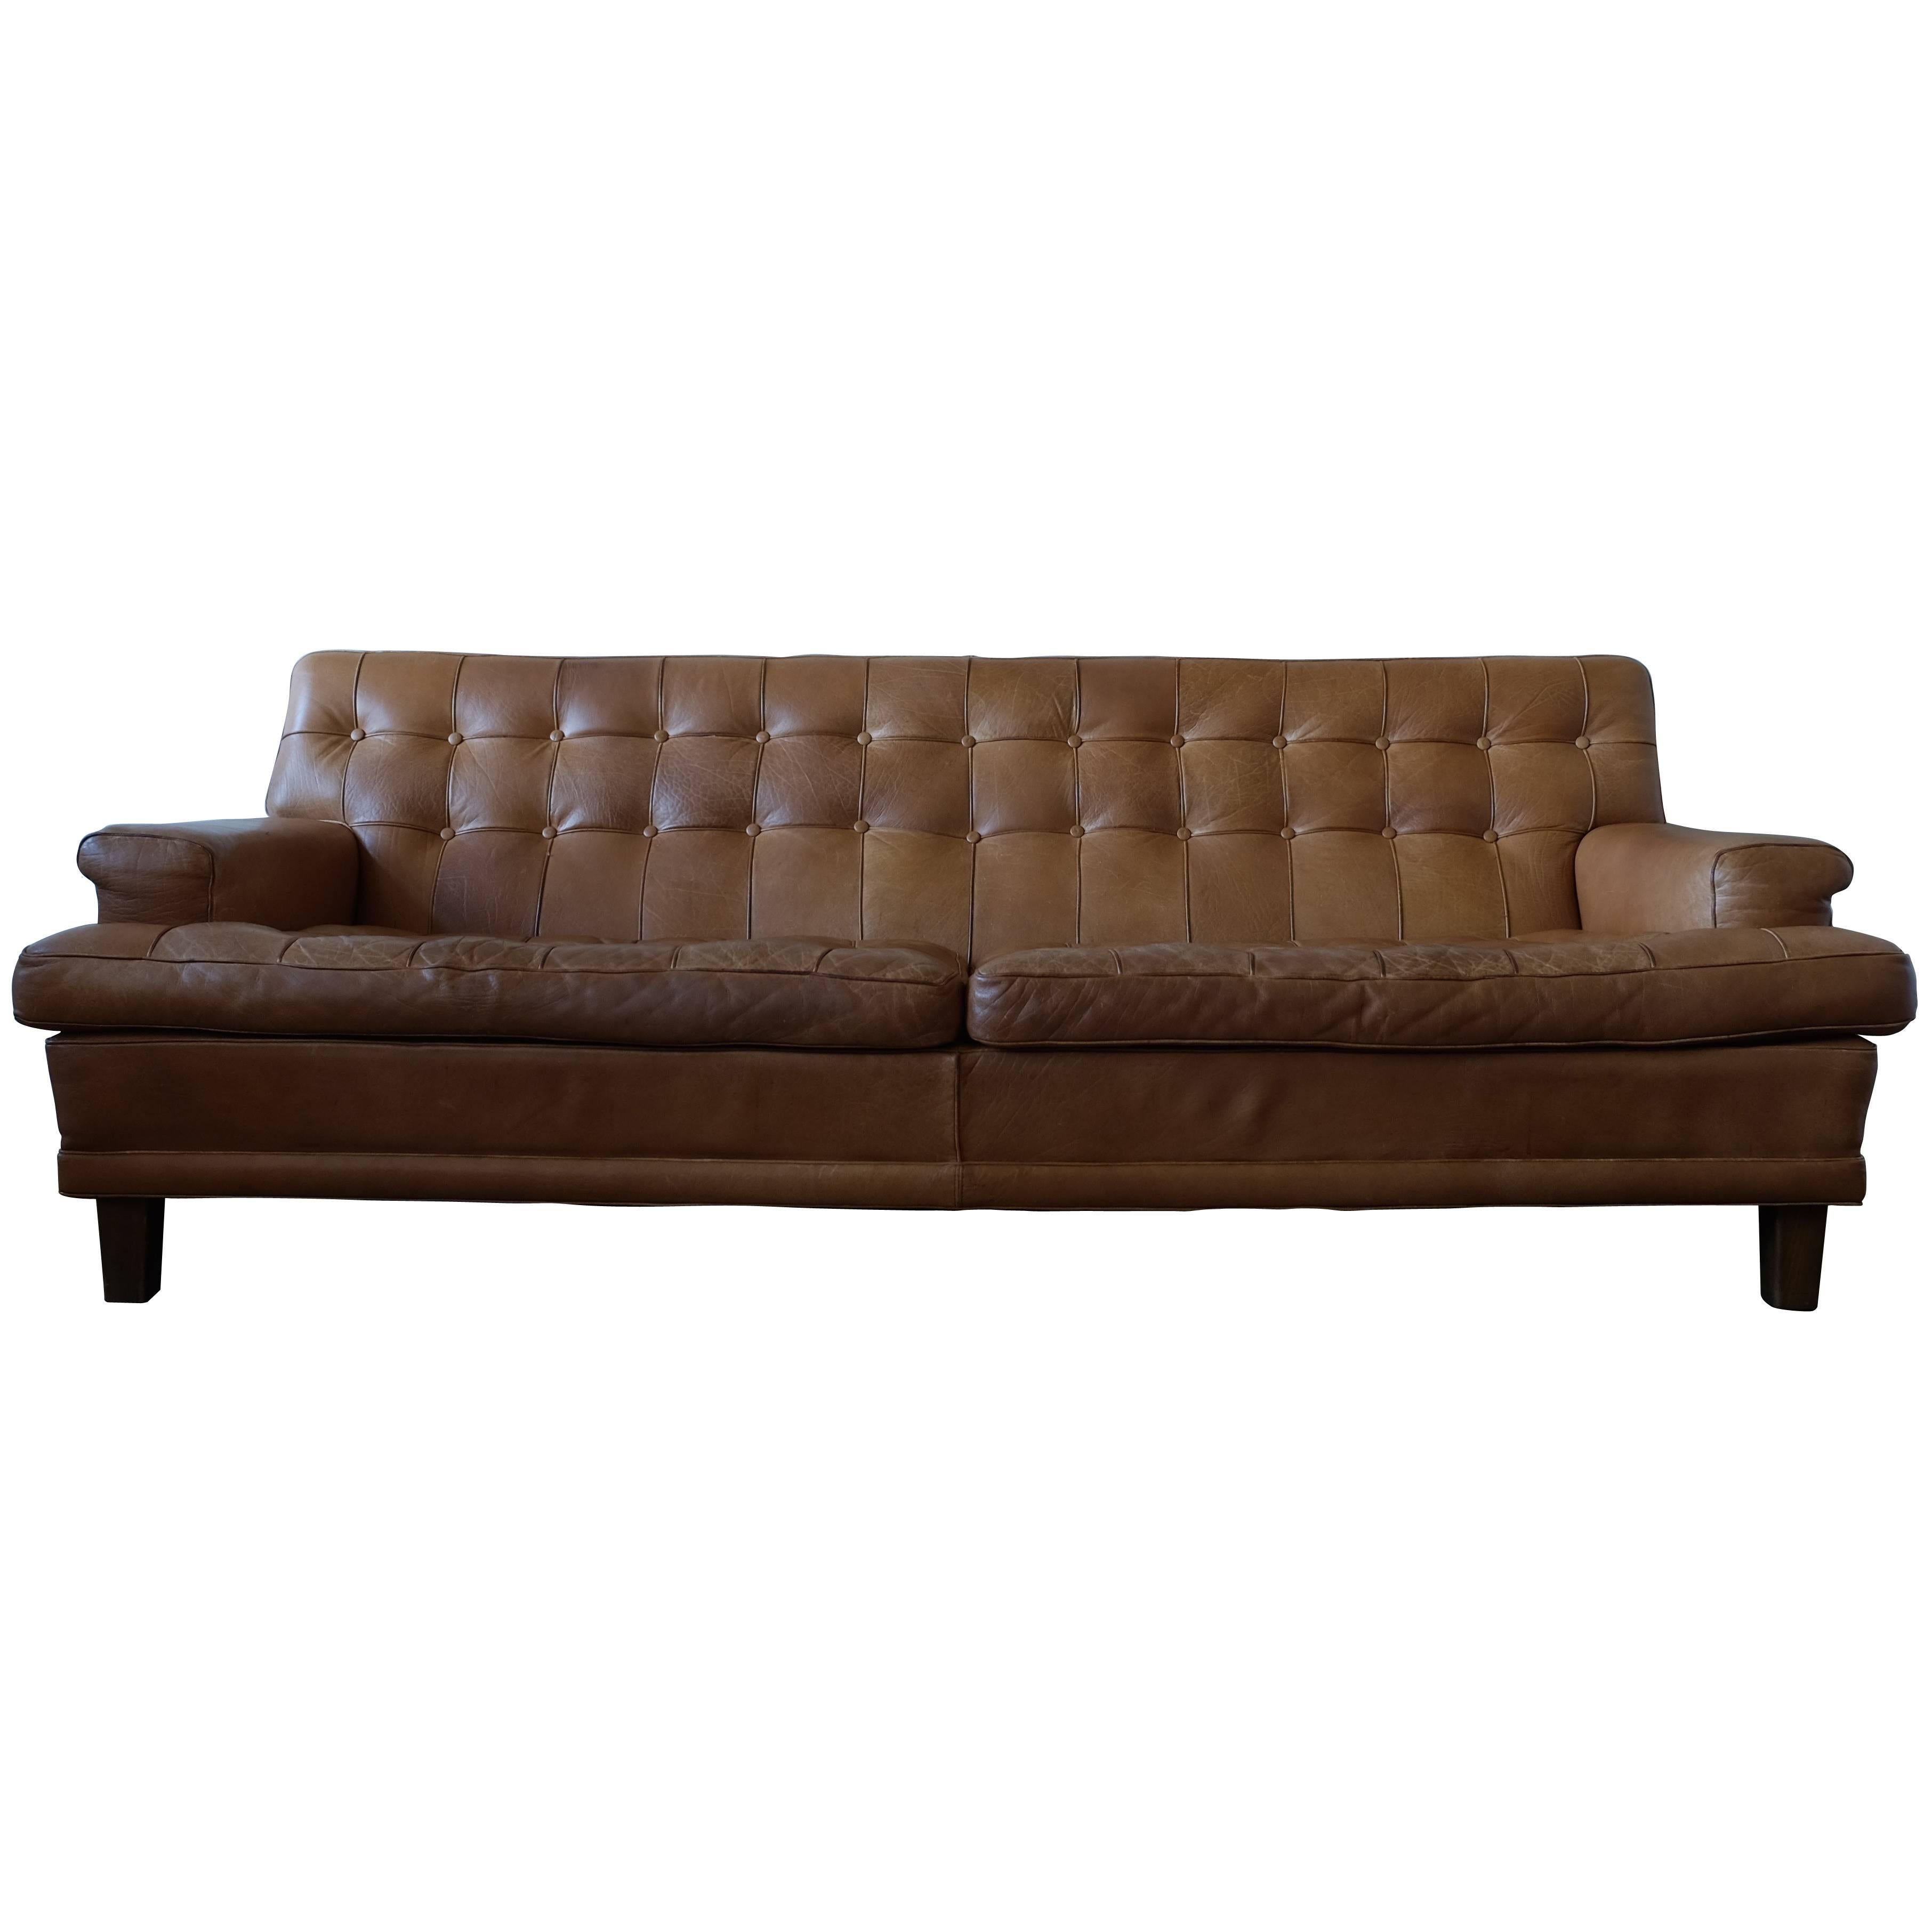 This fantastic sofa is designed by Arne Norell and produced by Arne Norell Möbler, Sweden.
Dark stained beech and cognac brown buffalo leather. Good condition with nice patina.